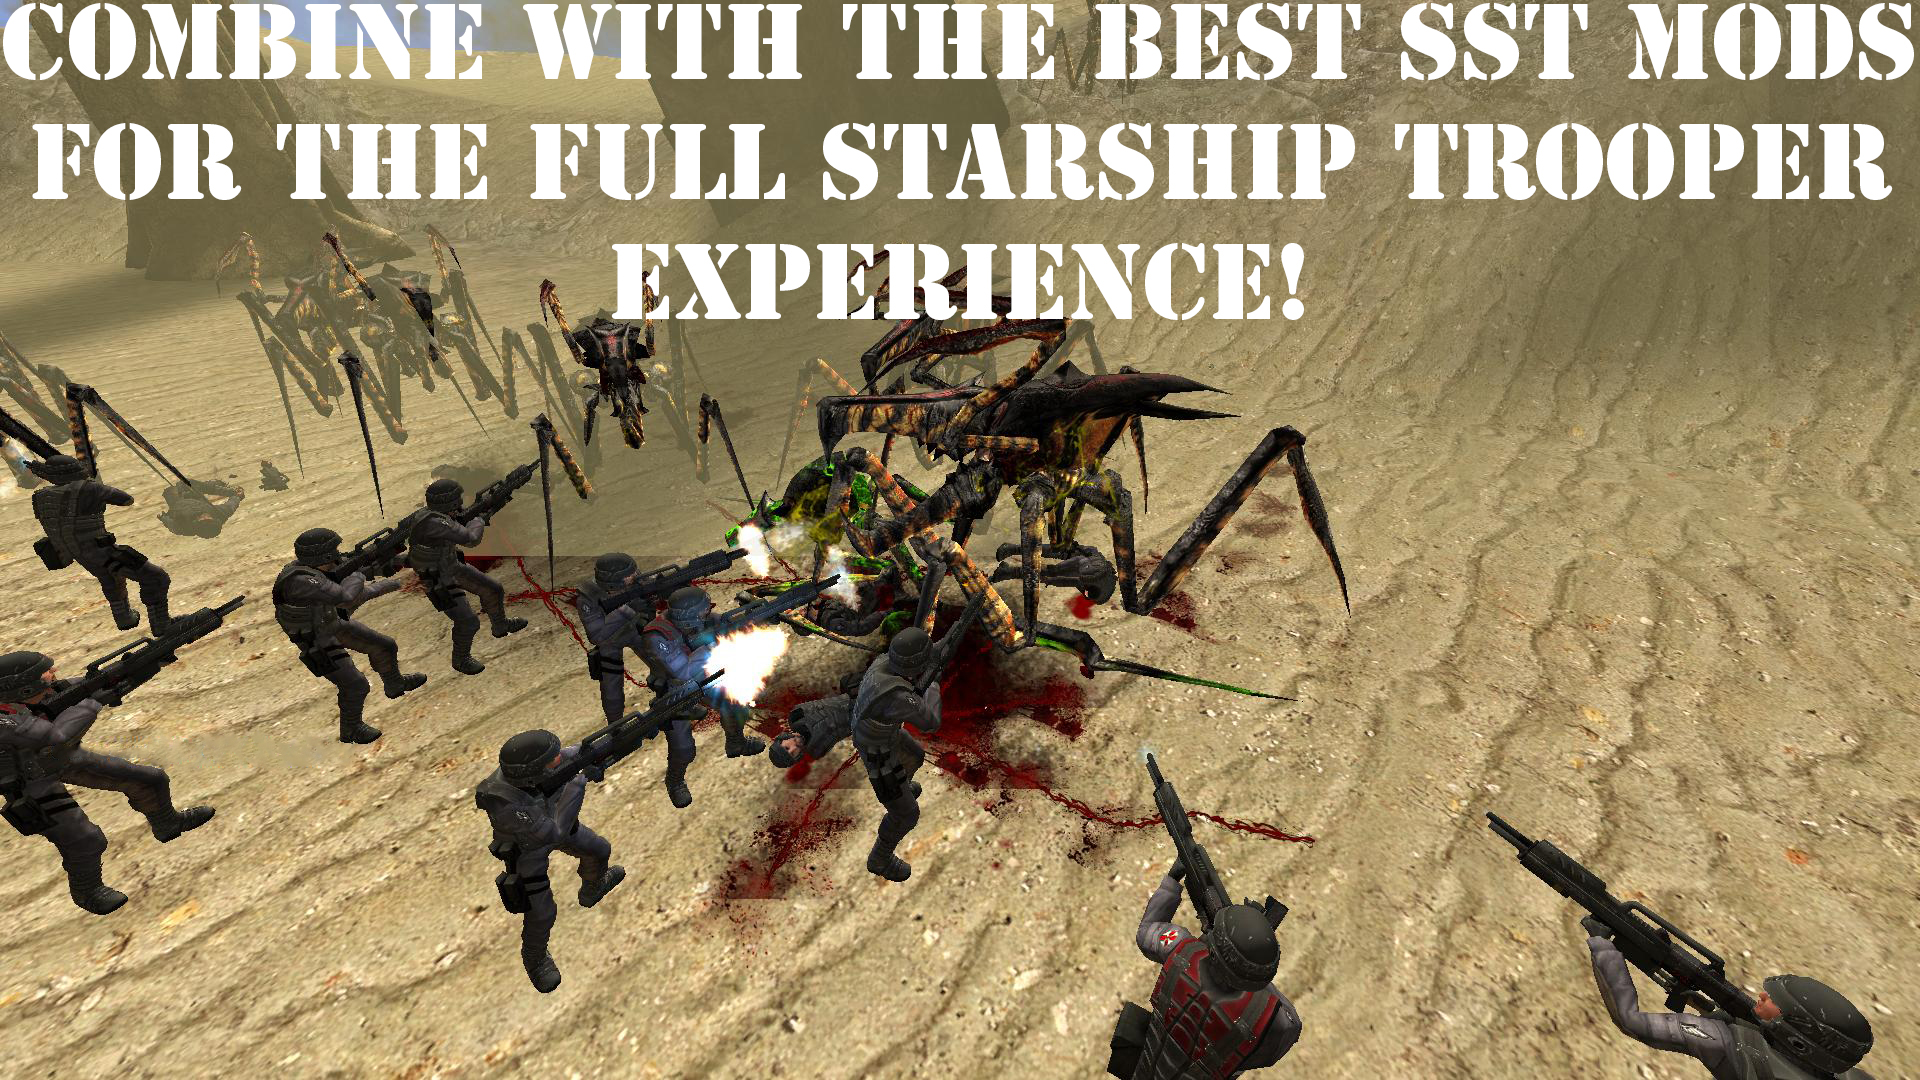 Starship troopers full game for